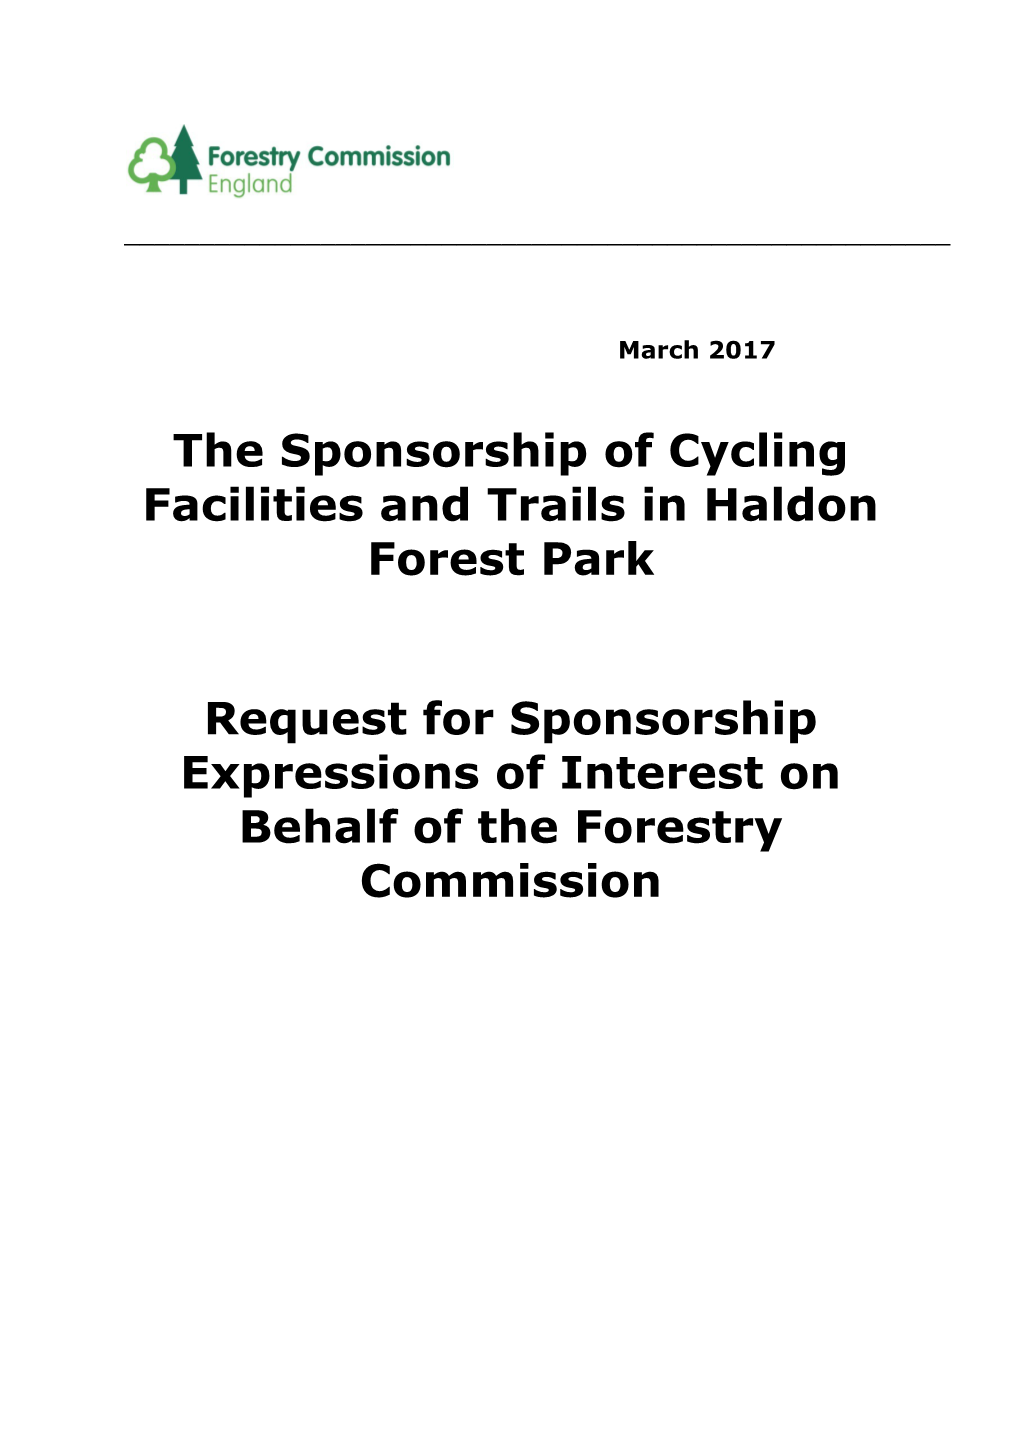 The Sponsorship of Cycling Facilities and Trails in Haldon Forest Park